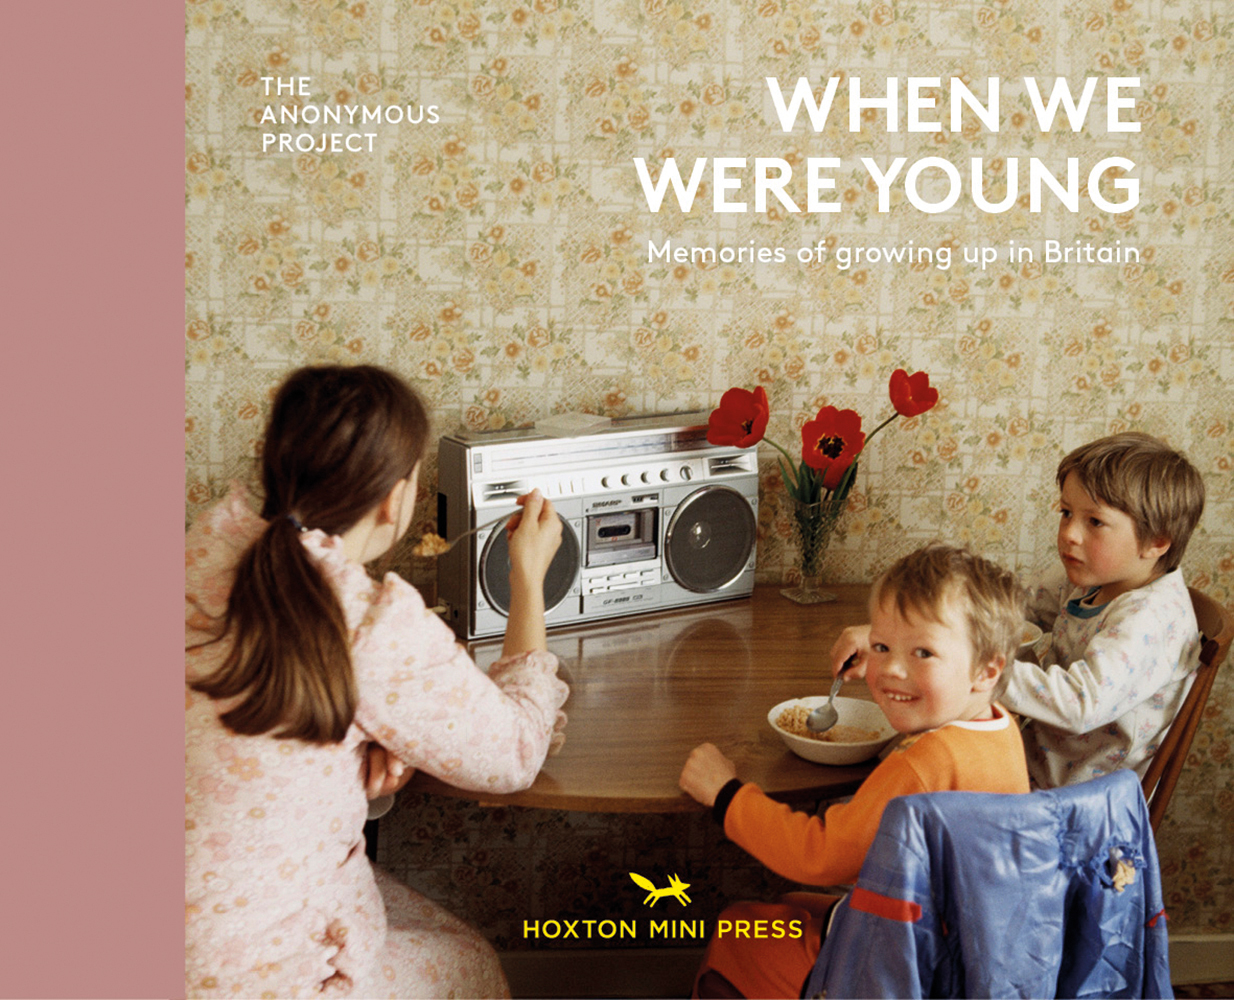 Three white young children sitting at round table eating cereal, with ghetto plaster, on landscape cover of 'When We Were Young, Memories of growing up in Britain', by Hoxton Mini Press.